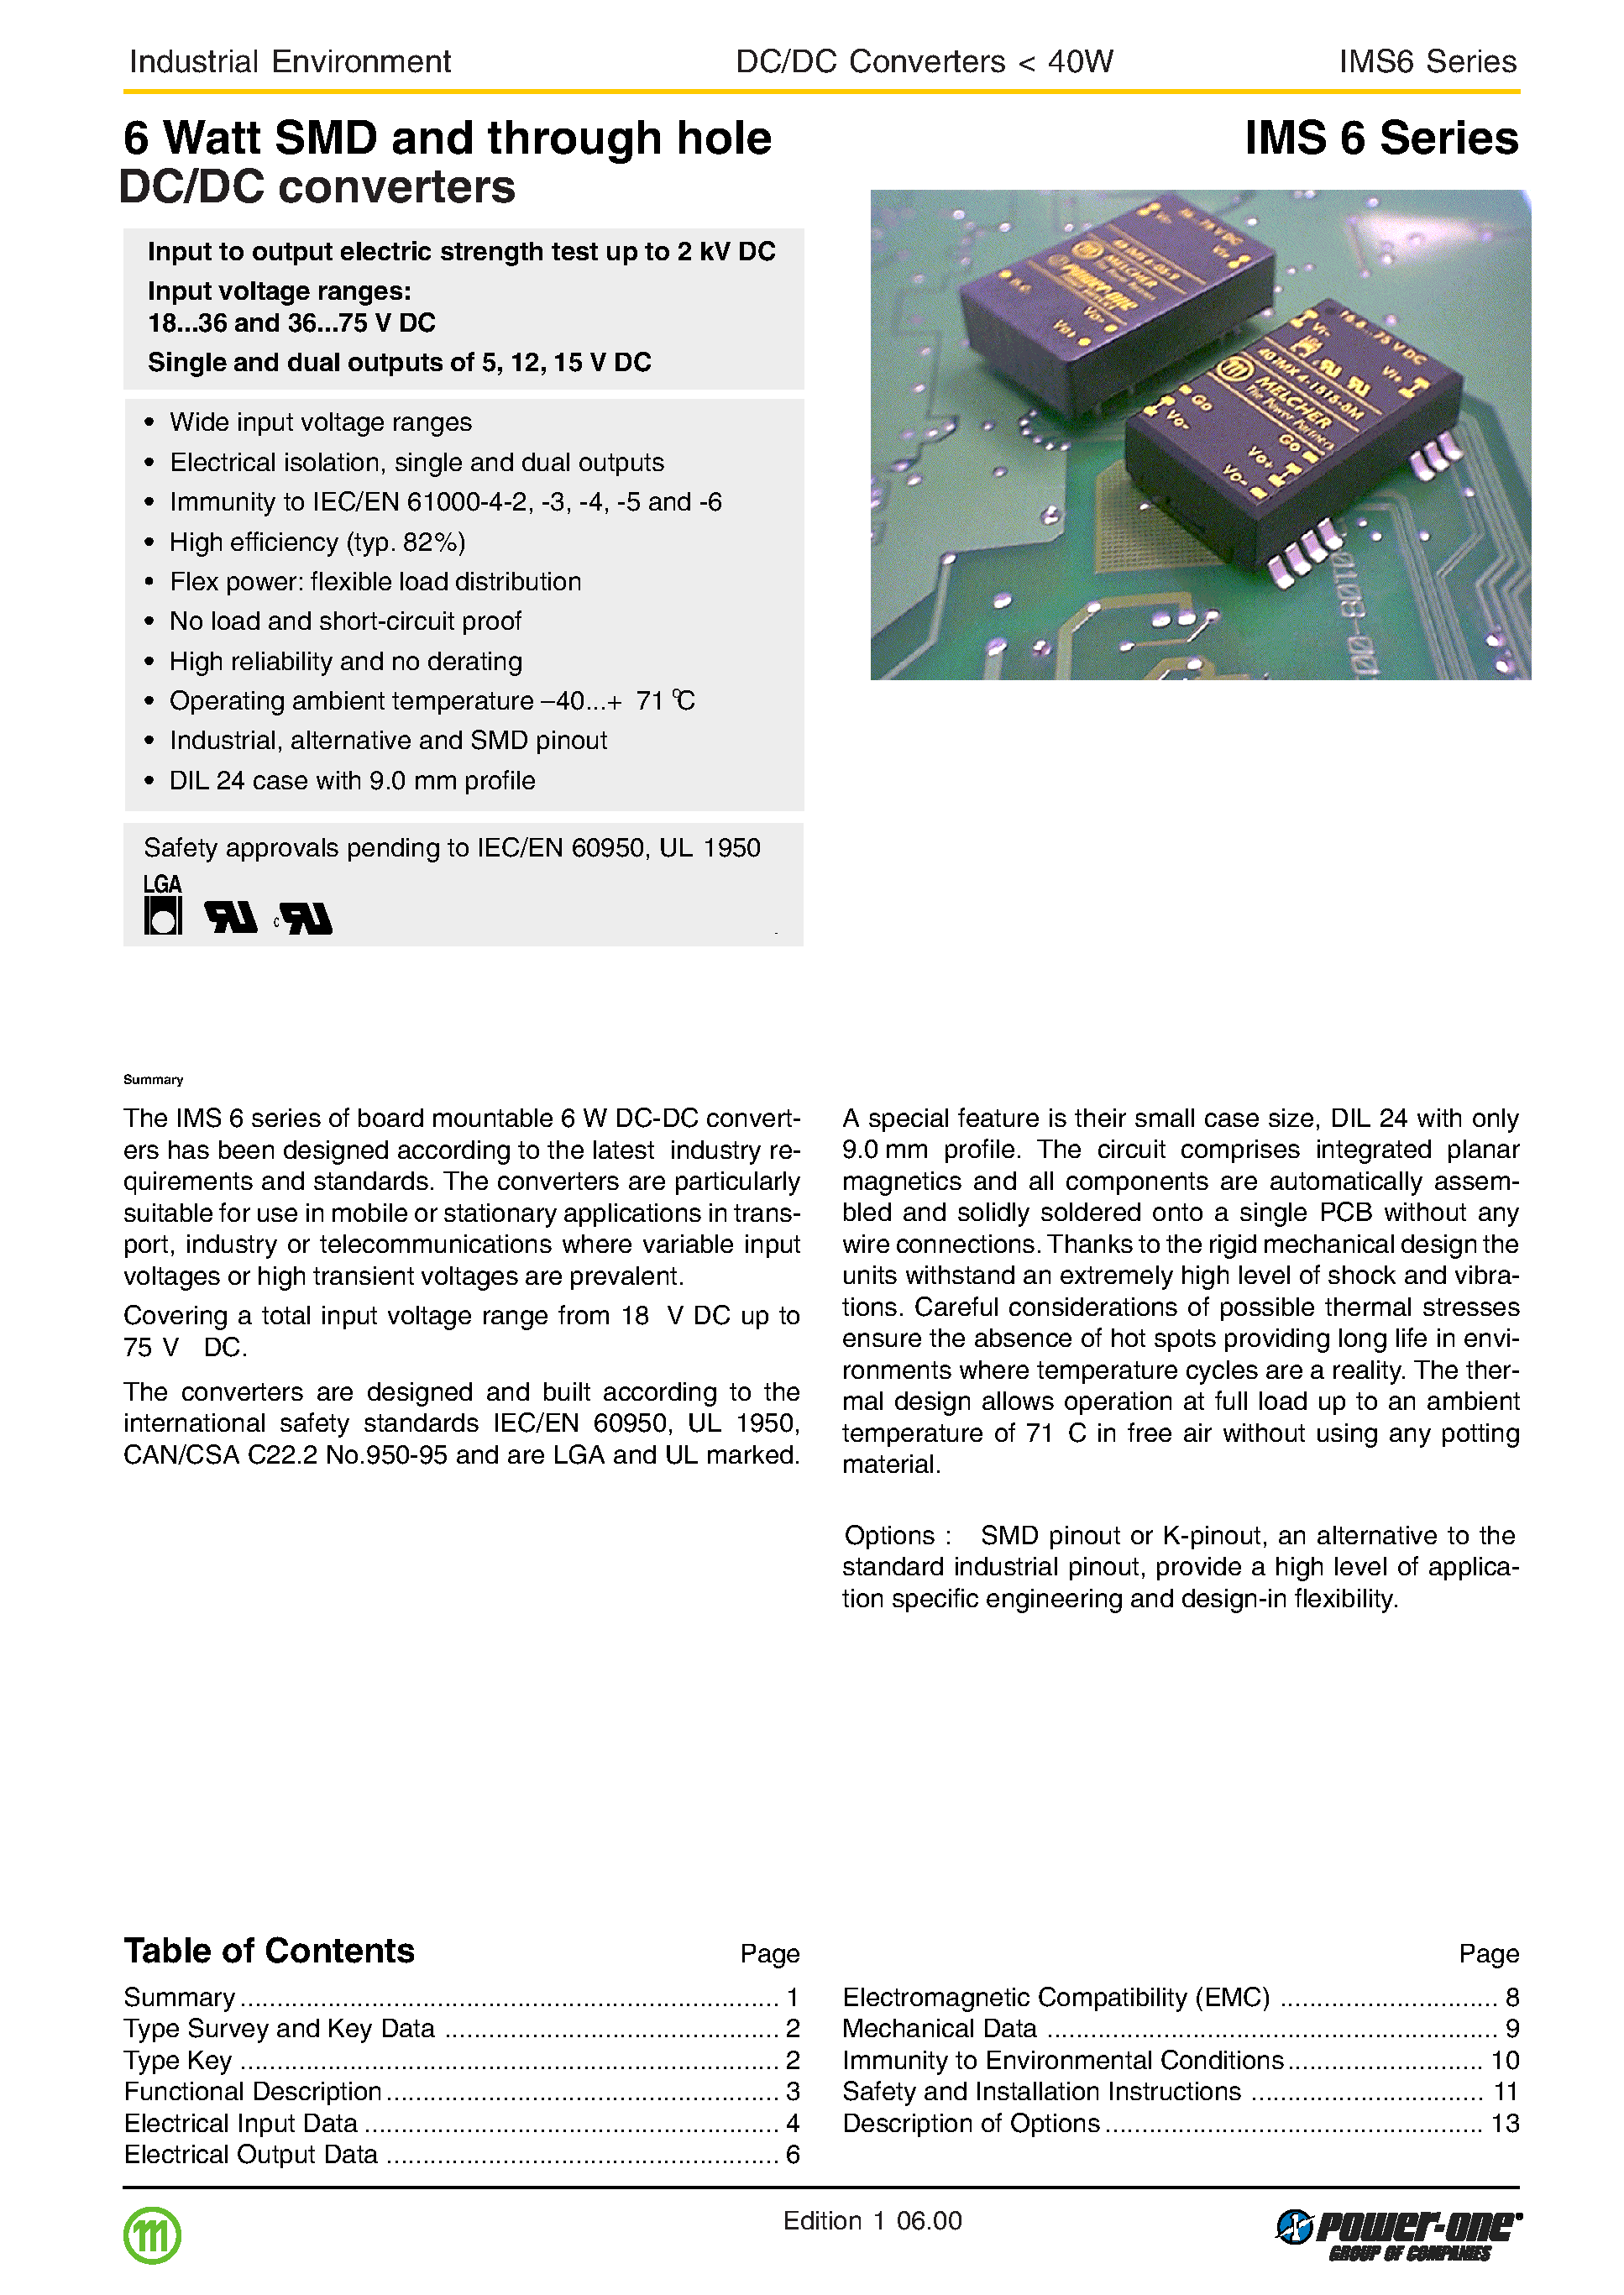 Datasheet 48IMS6-12-9 - 6 Watt SMD and through hole DC/DC converters page 1